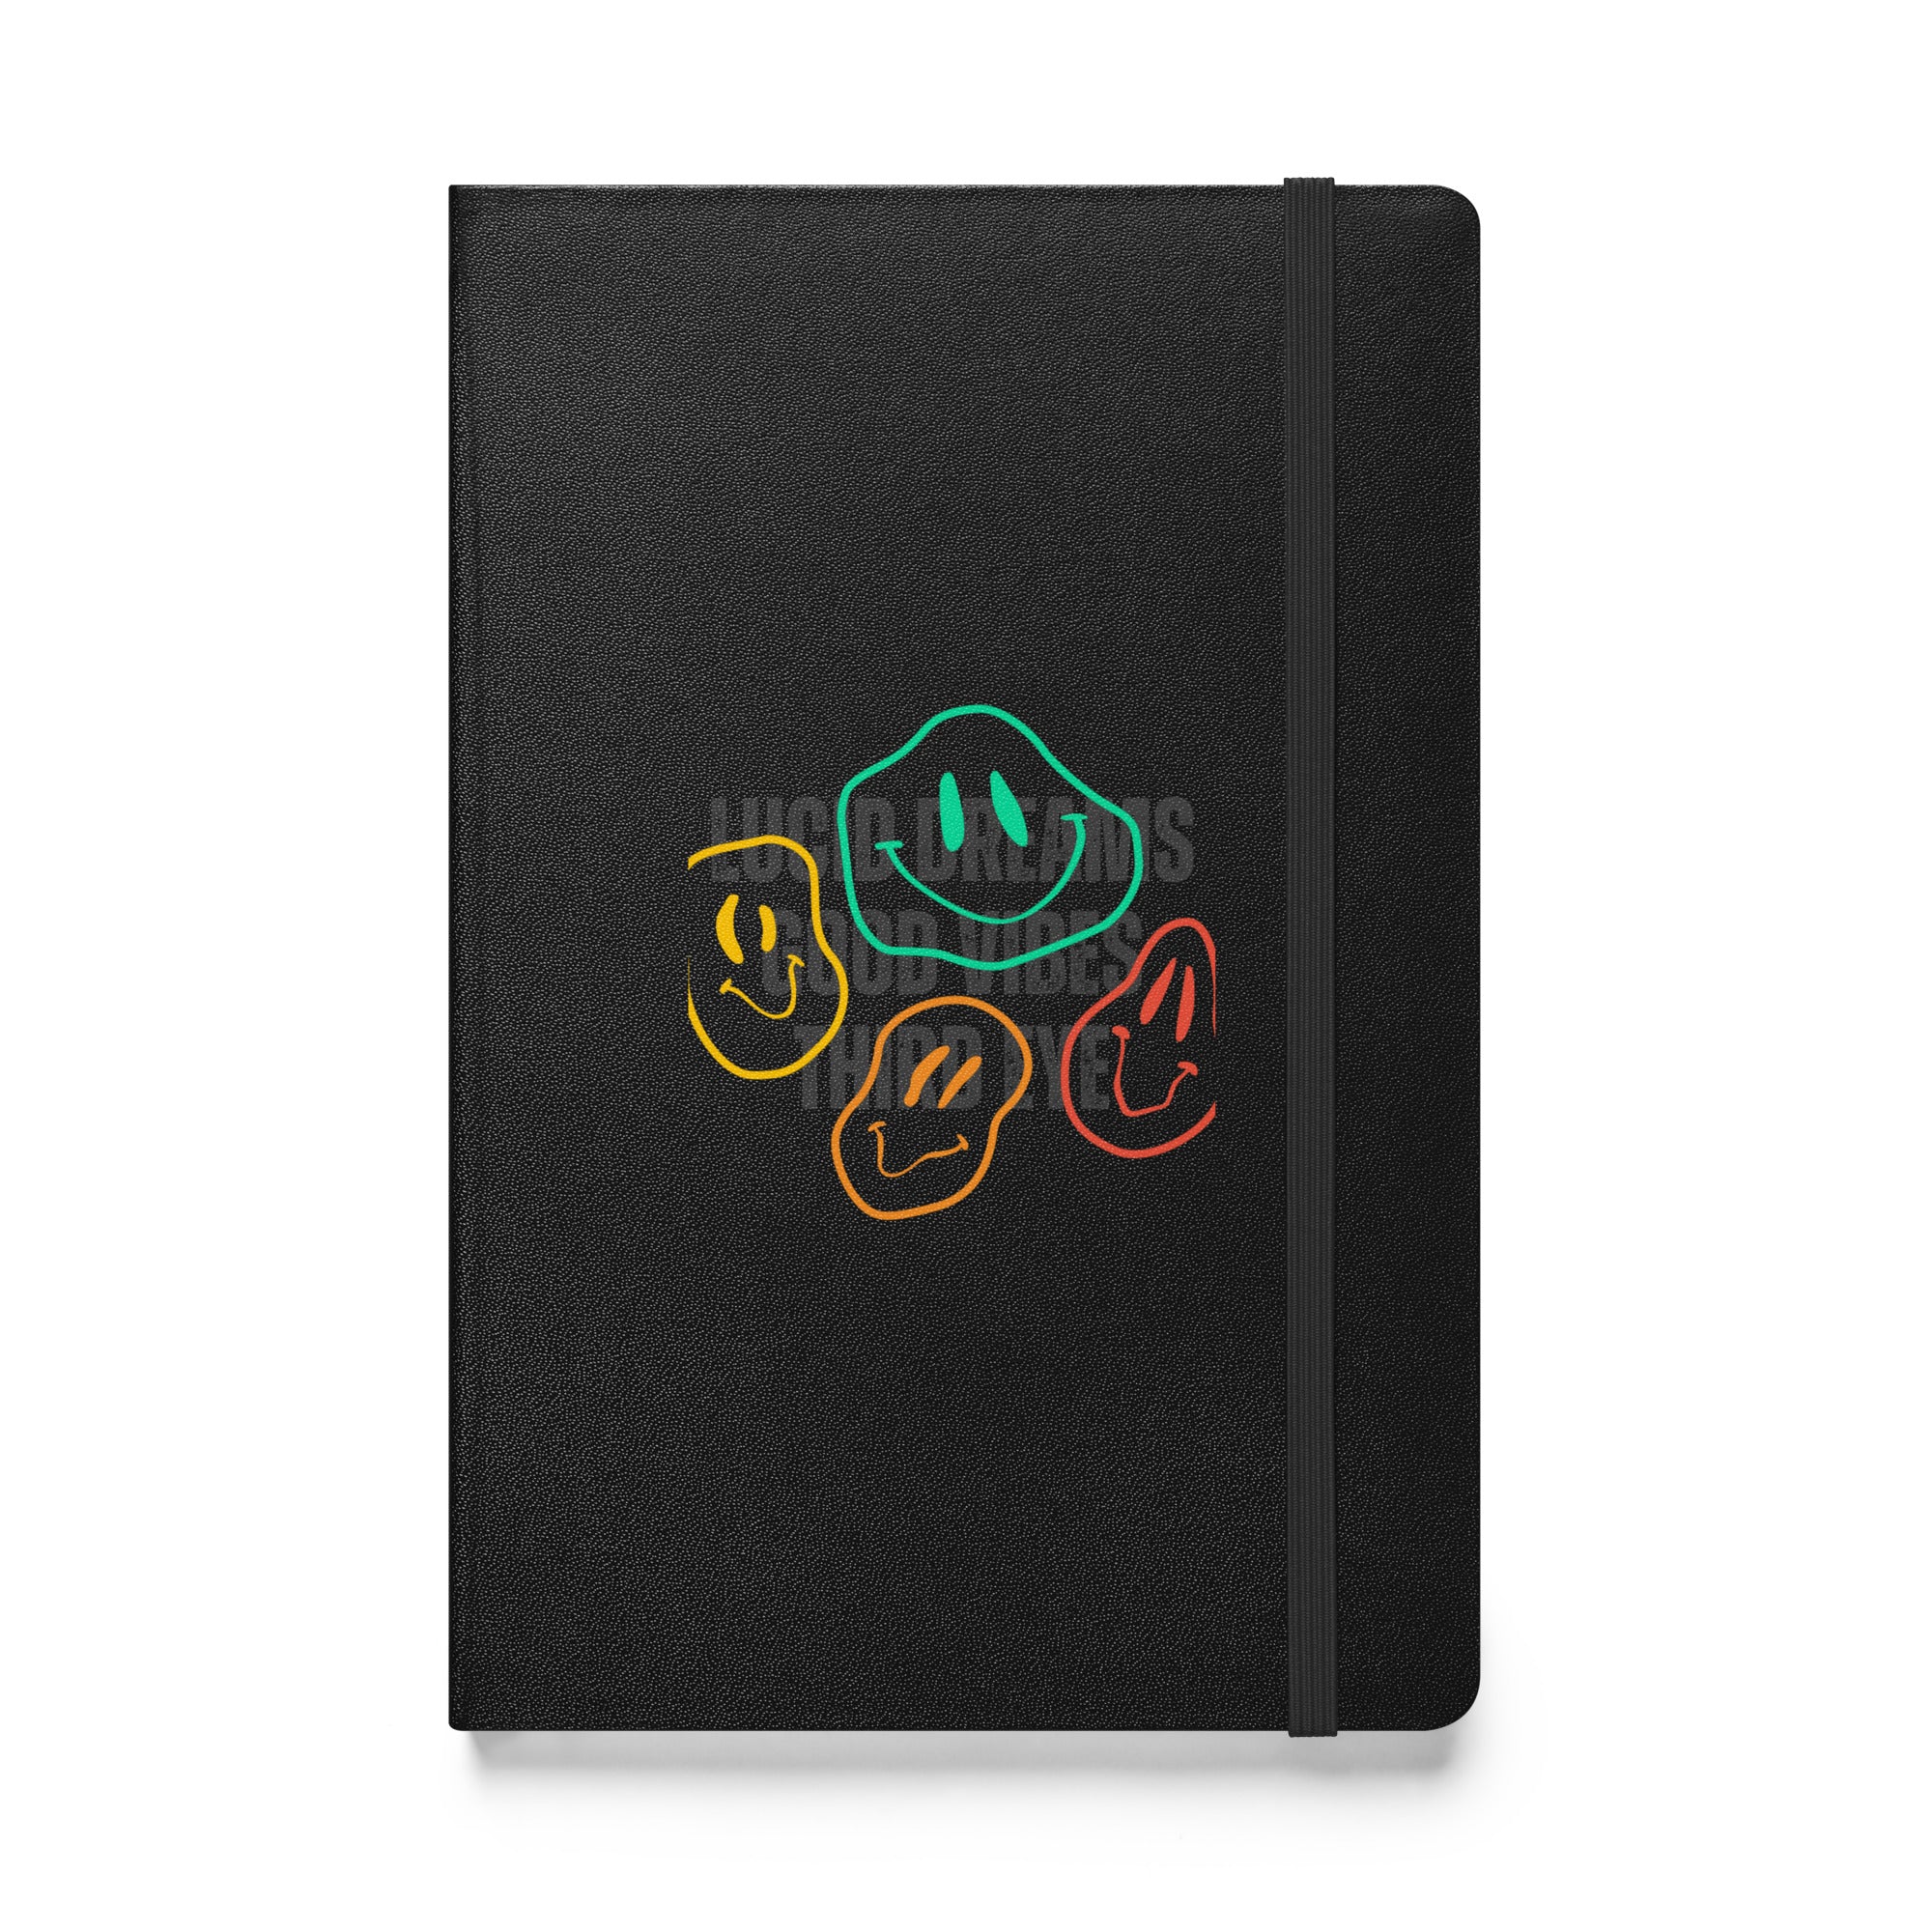 Lucid Dreams Hardcover bound notebook